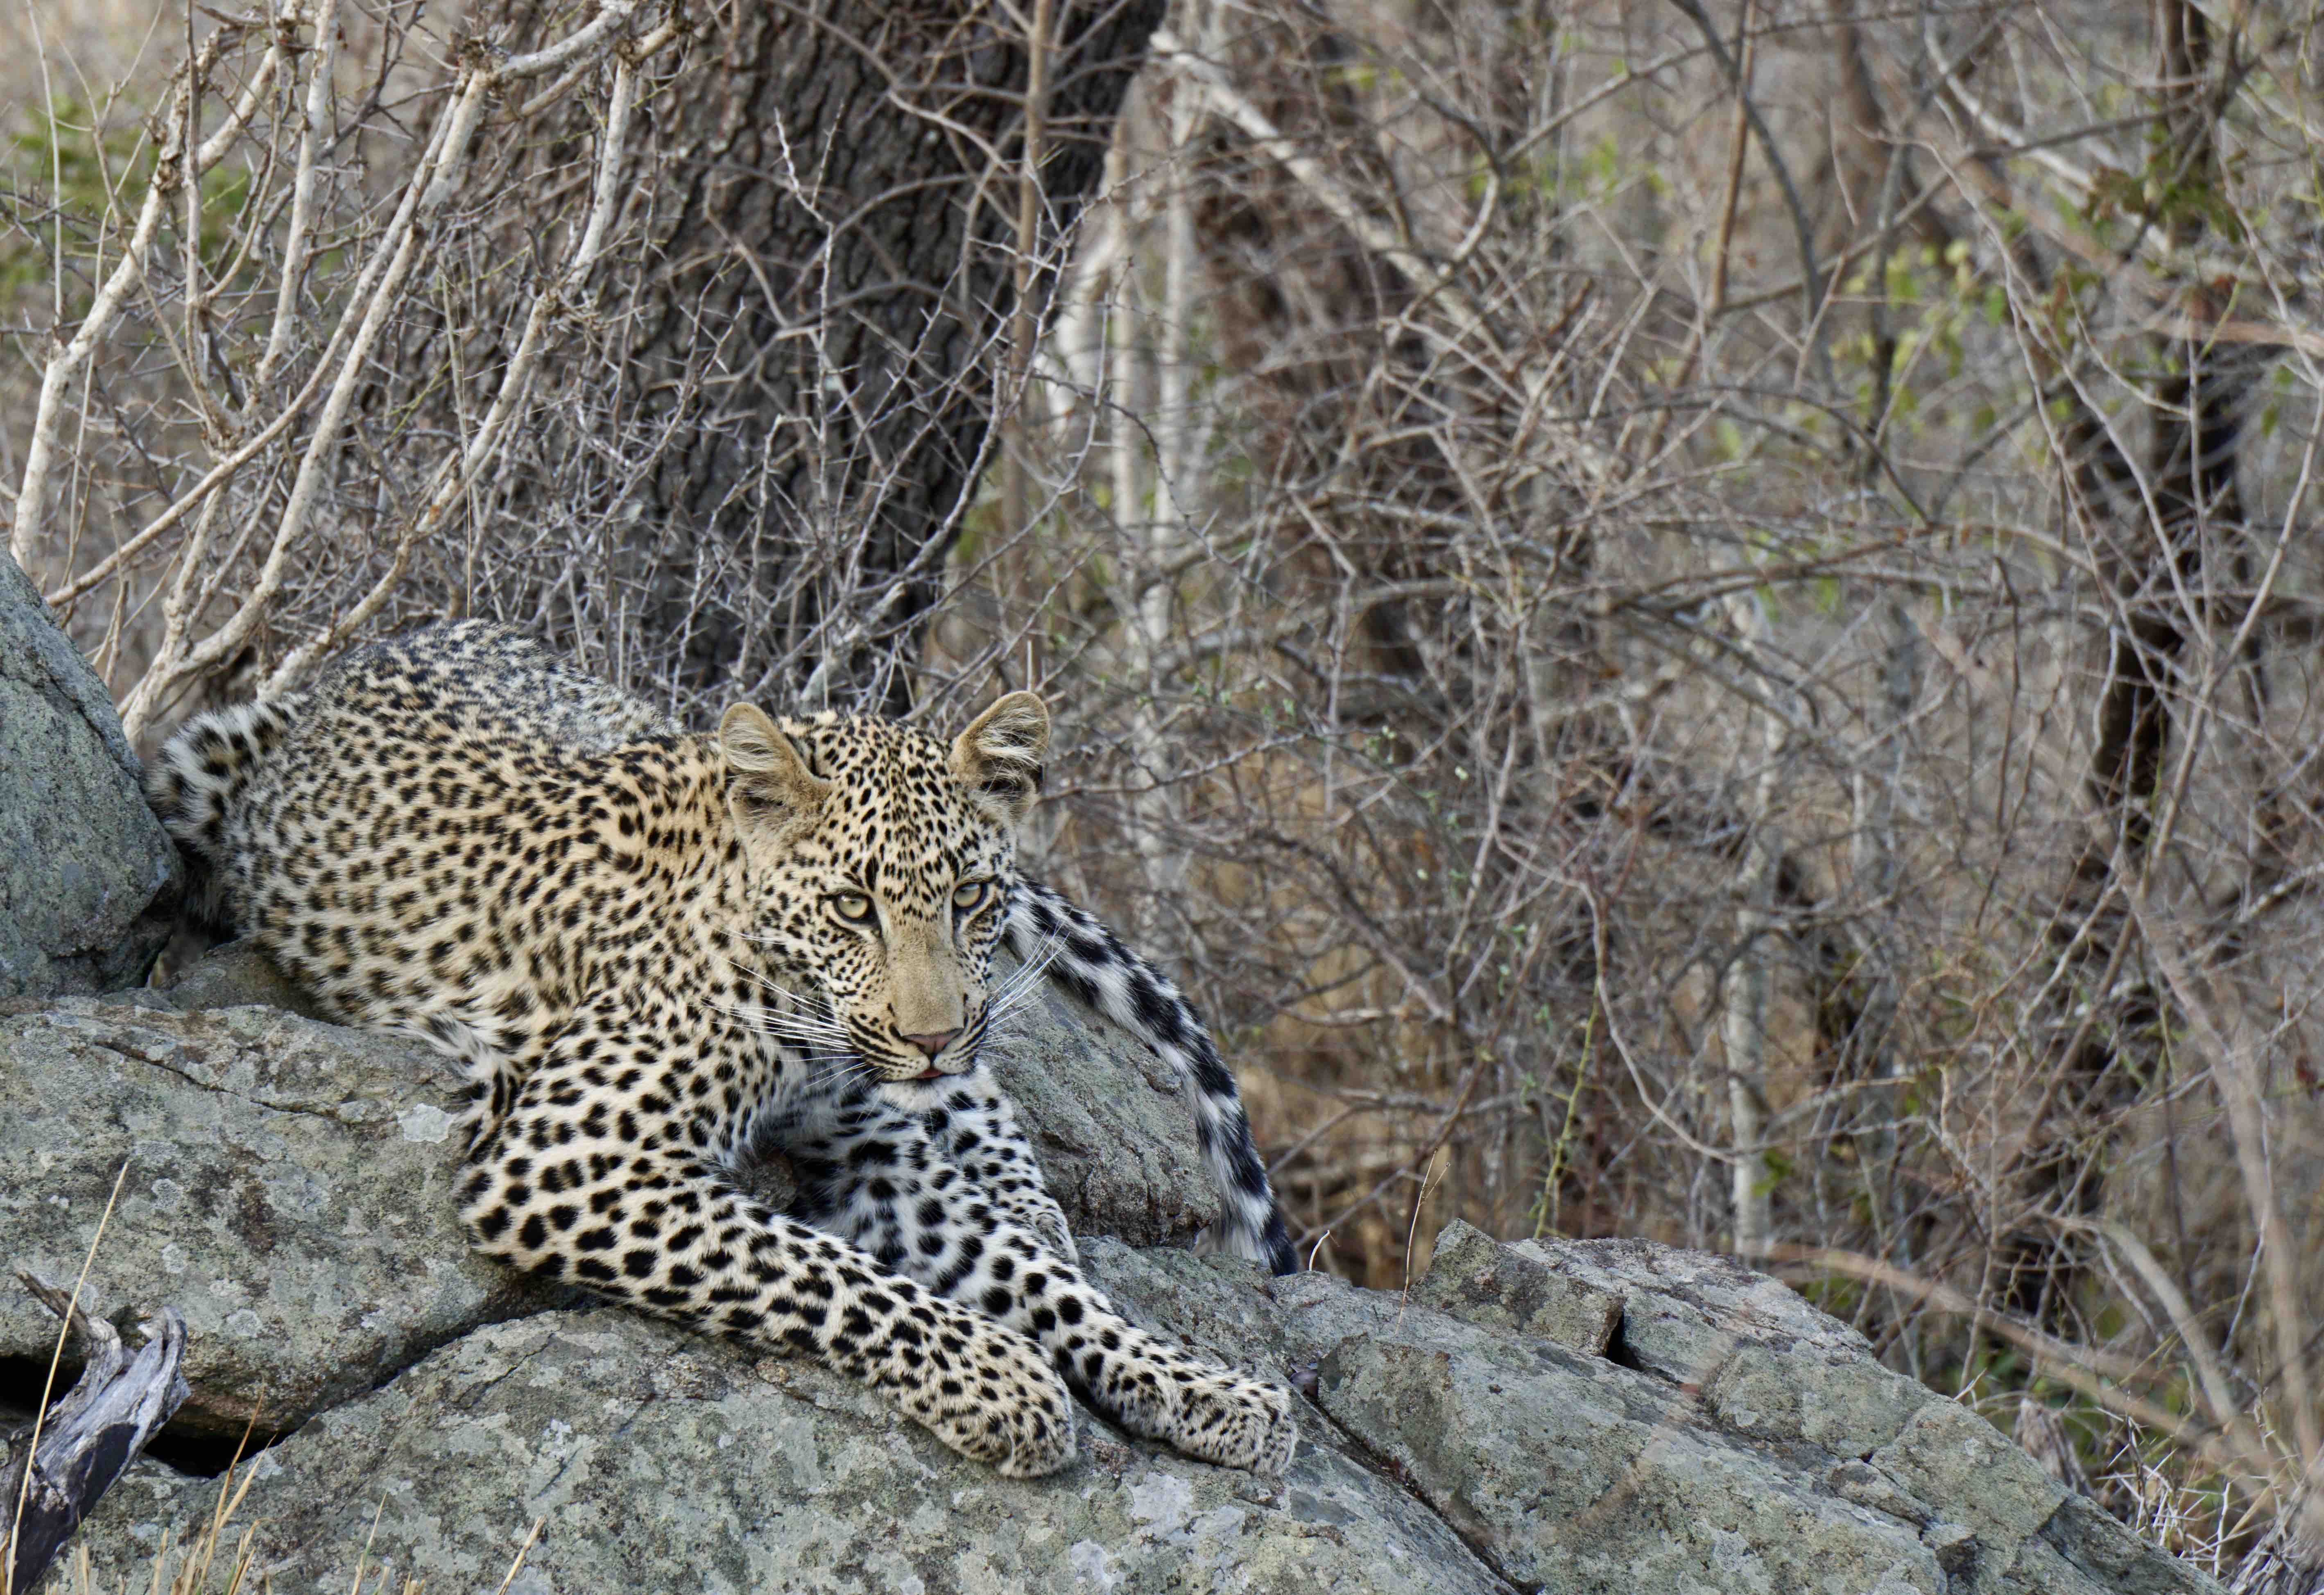 Leopards in Sabi Sands are notorious for being calm and habituated to trucks full of tourists.